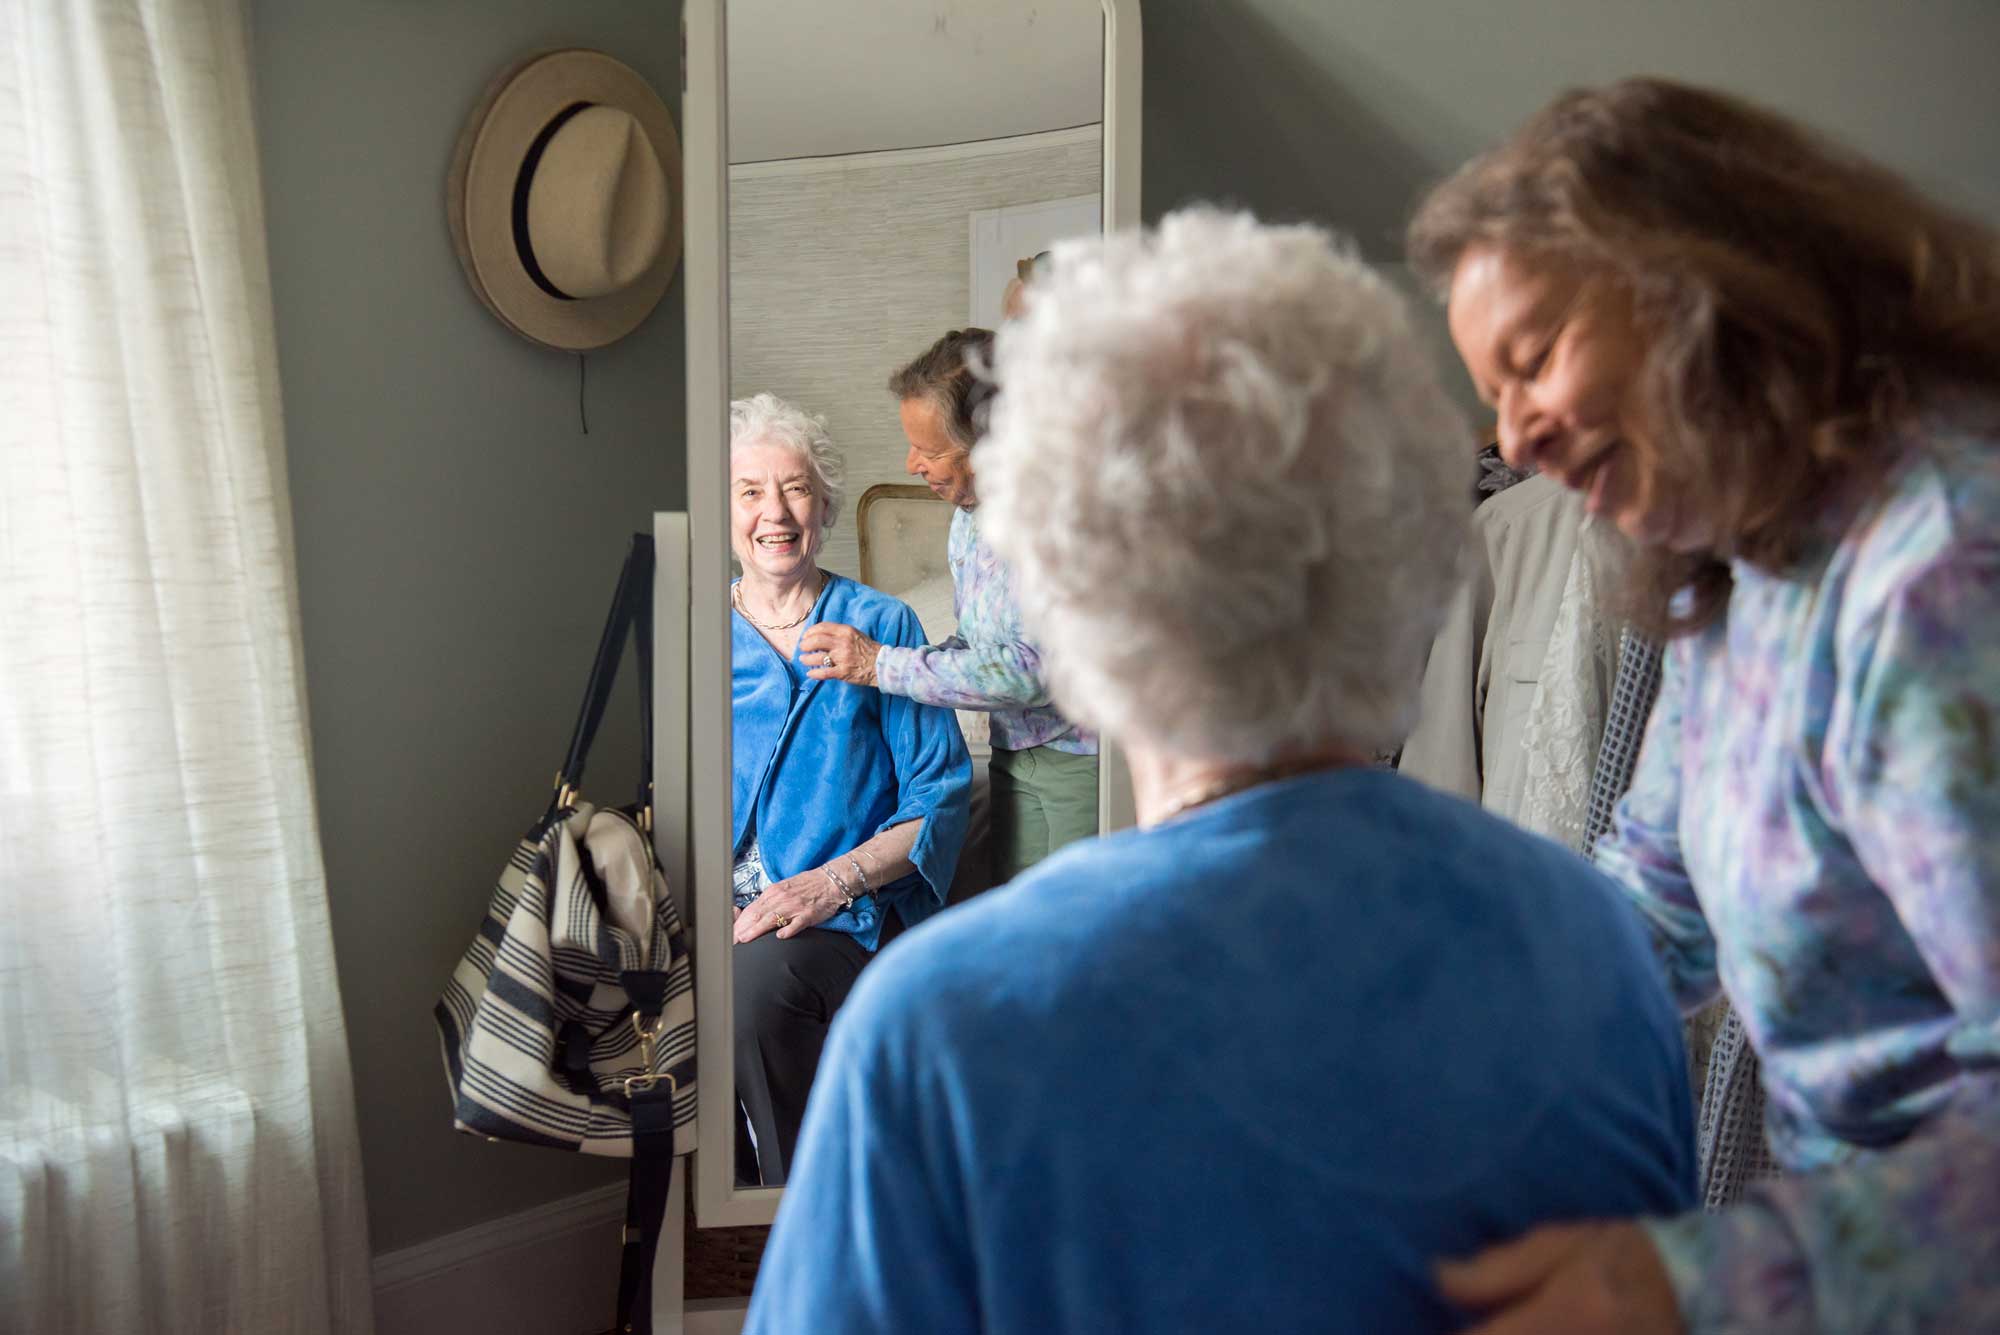 Make the Most Of Healthy Aging Month! Prioritize Personal Wellness With Seniors Helping Seniors® In-Home Care Services